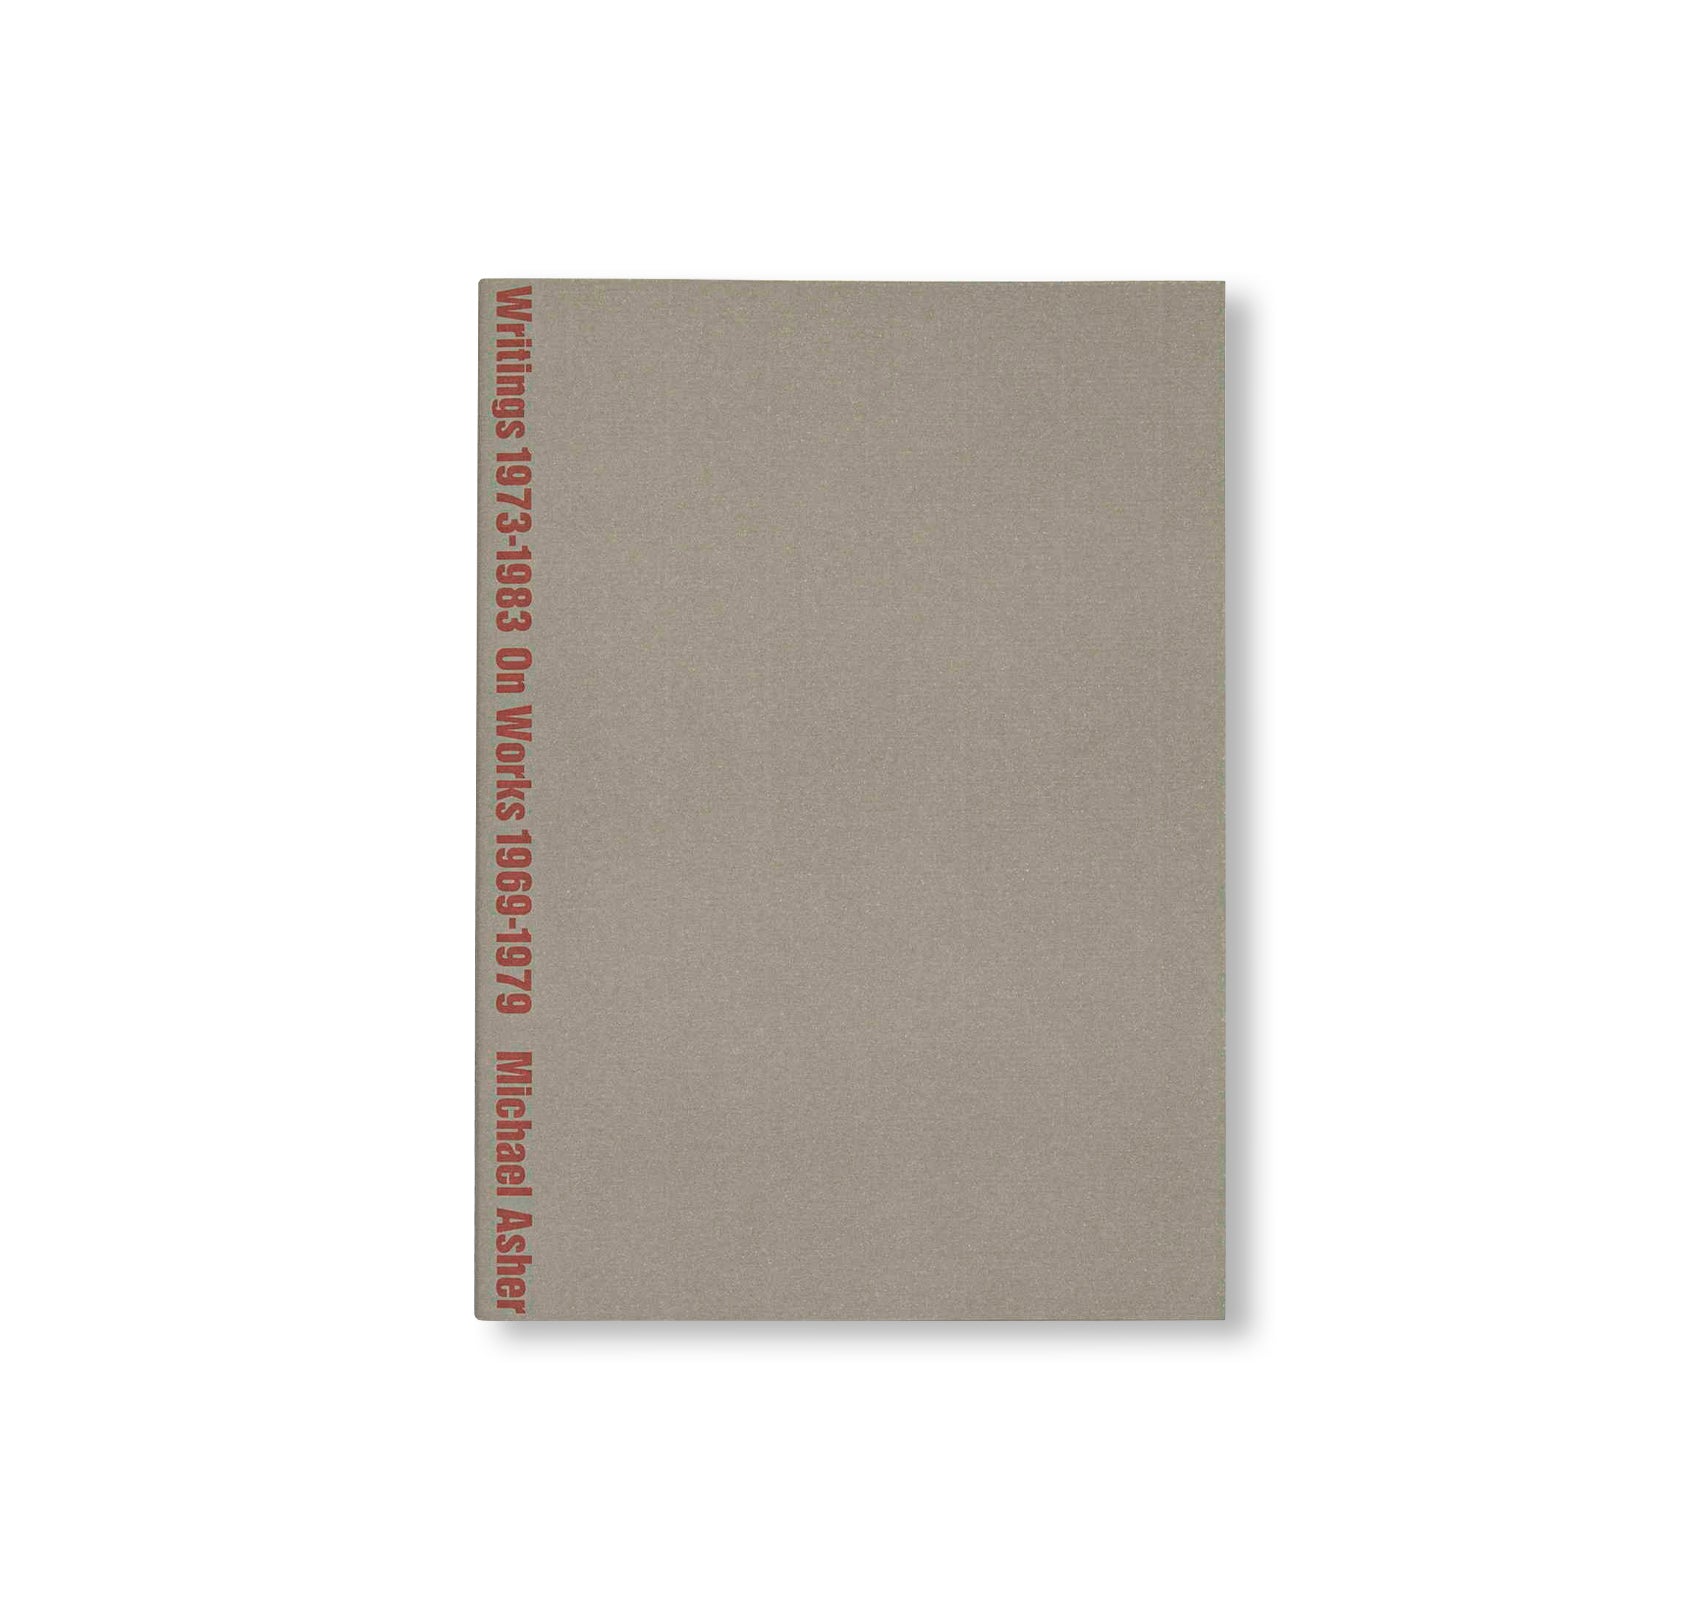 WRITINGS 1973–1983 ON WORKS 1969–1979 by Michael Asher